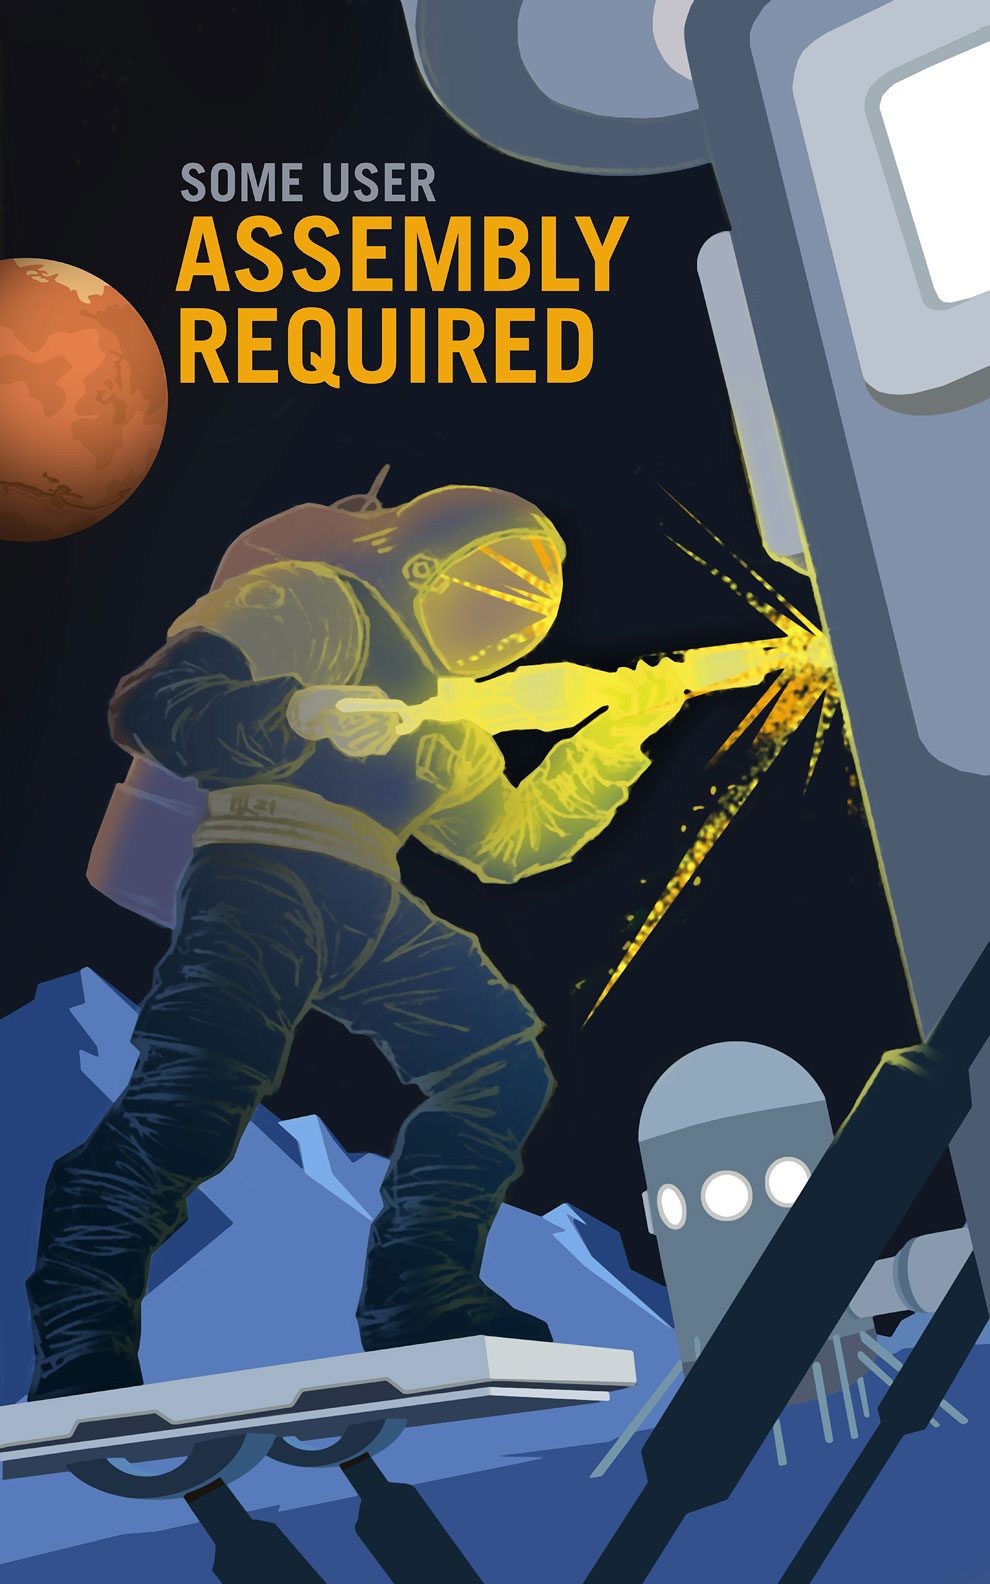 P07-Some-User-Assembly-Required-NASA-Recruitment-Poster